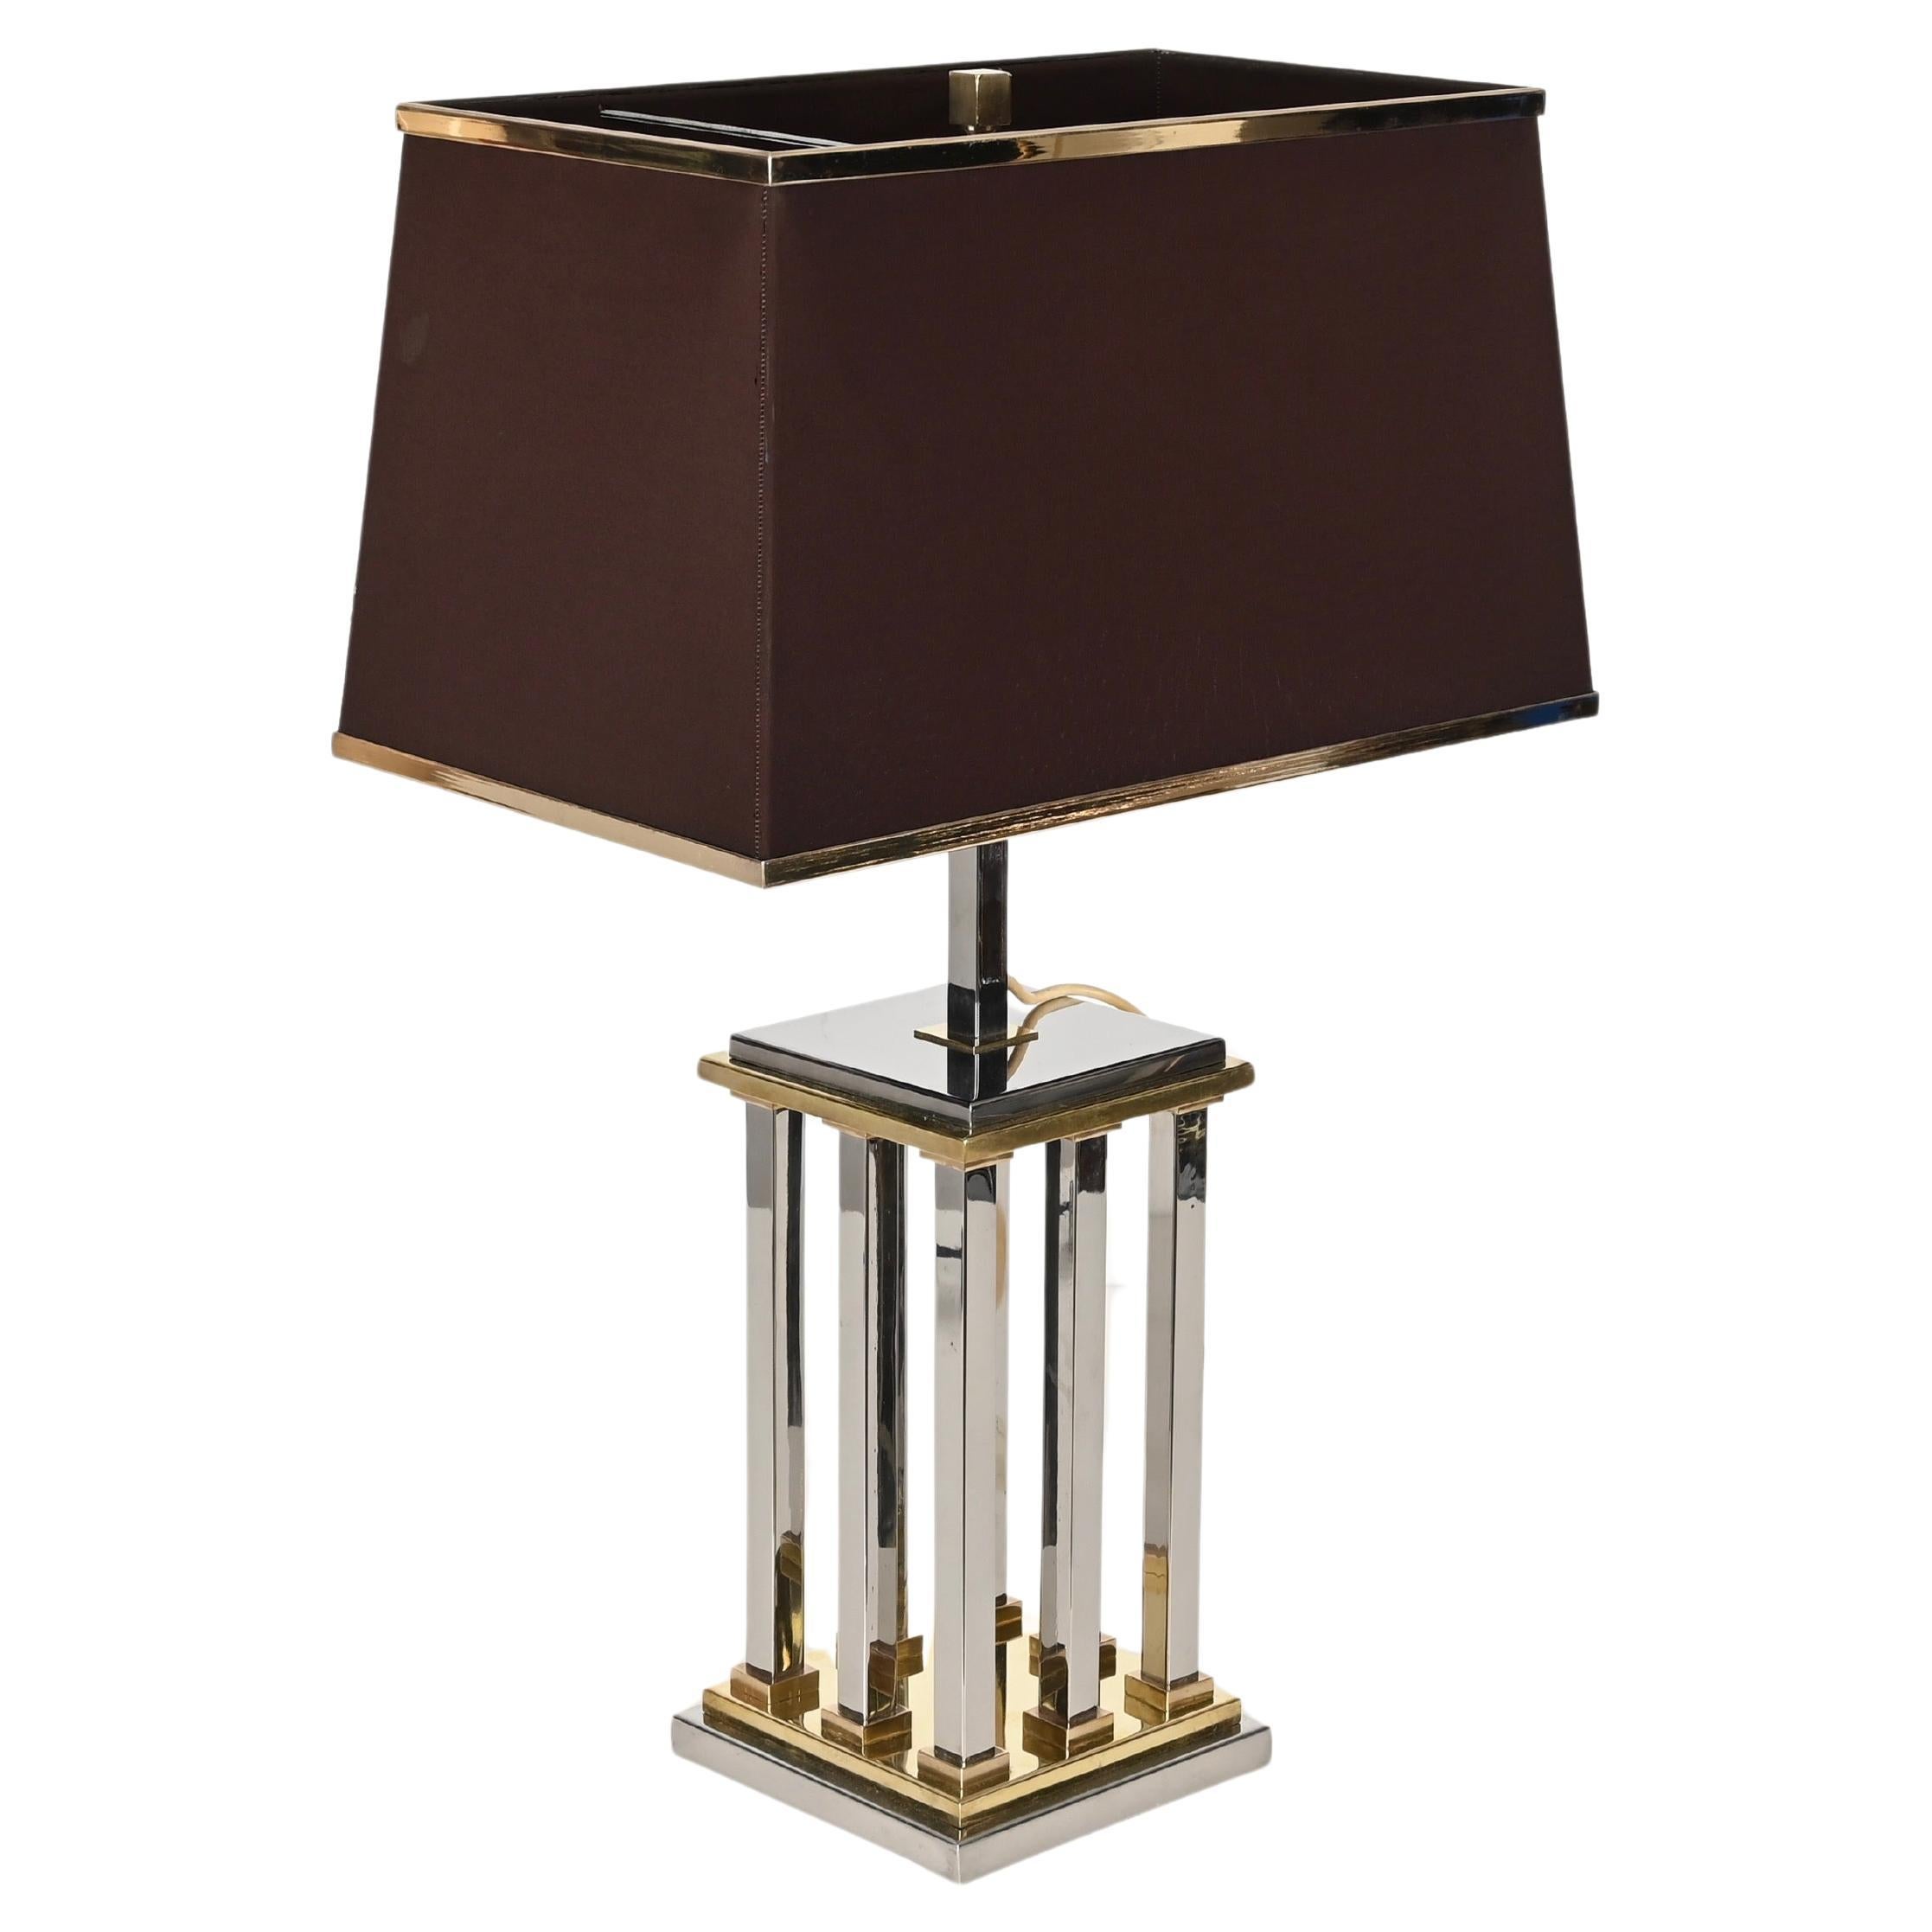 Hollywood Regency Chrome and Brass Columns Table Lamp by Rome Rega, Italy 1970s For Sale